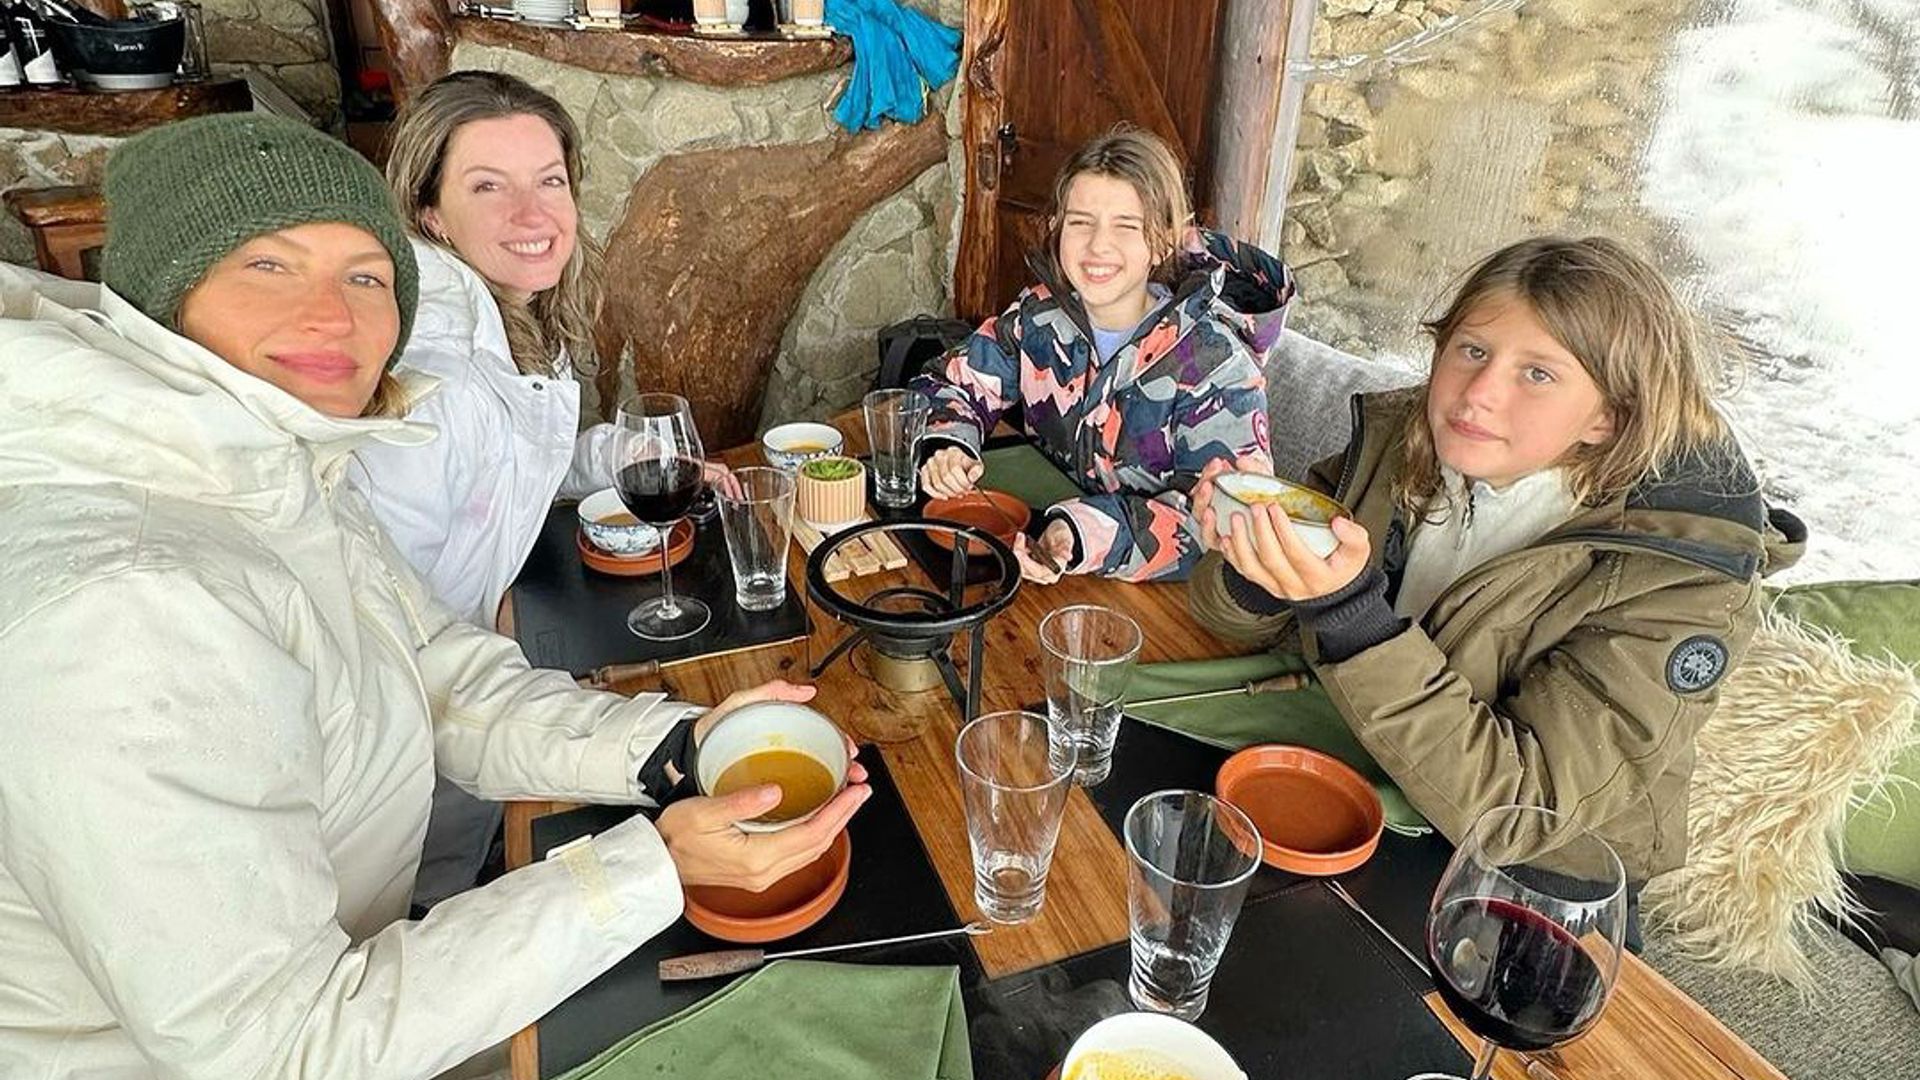 Gisele and Patricia Bundchen having lunch with their daughters